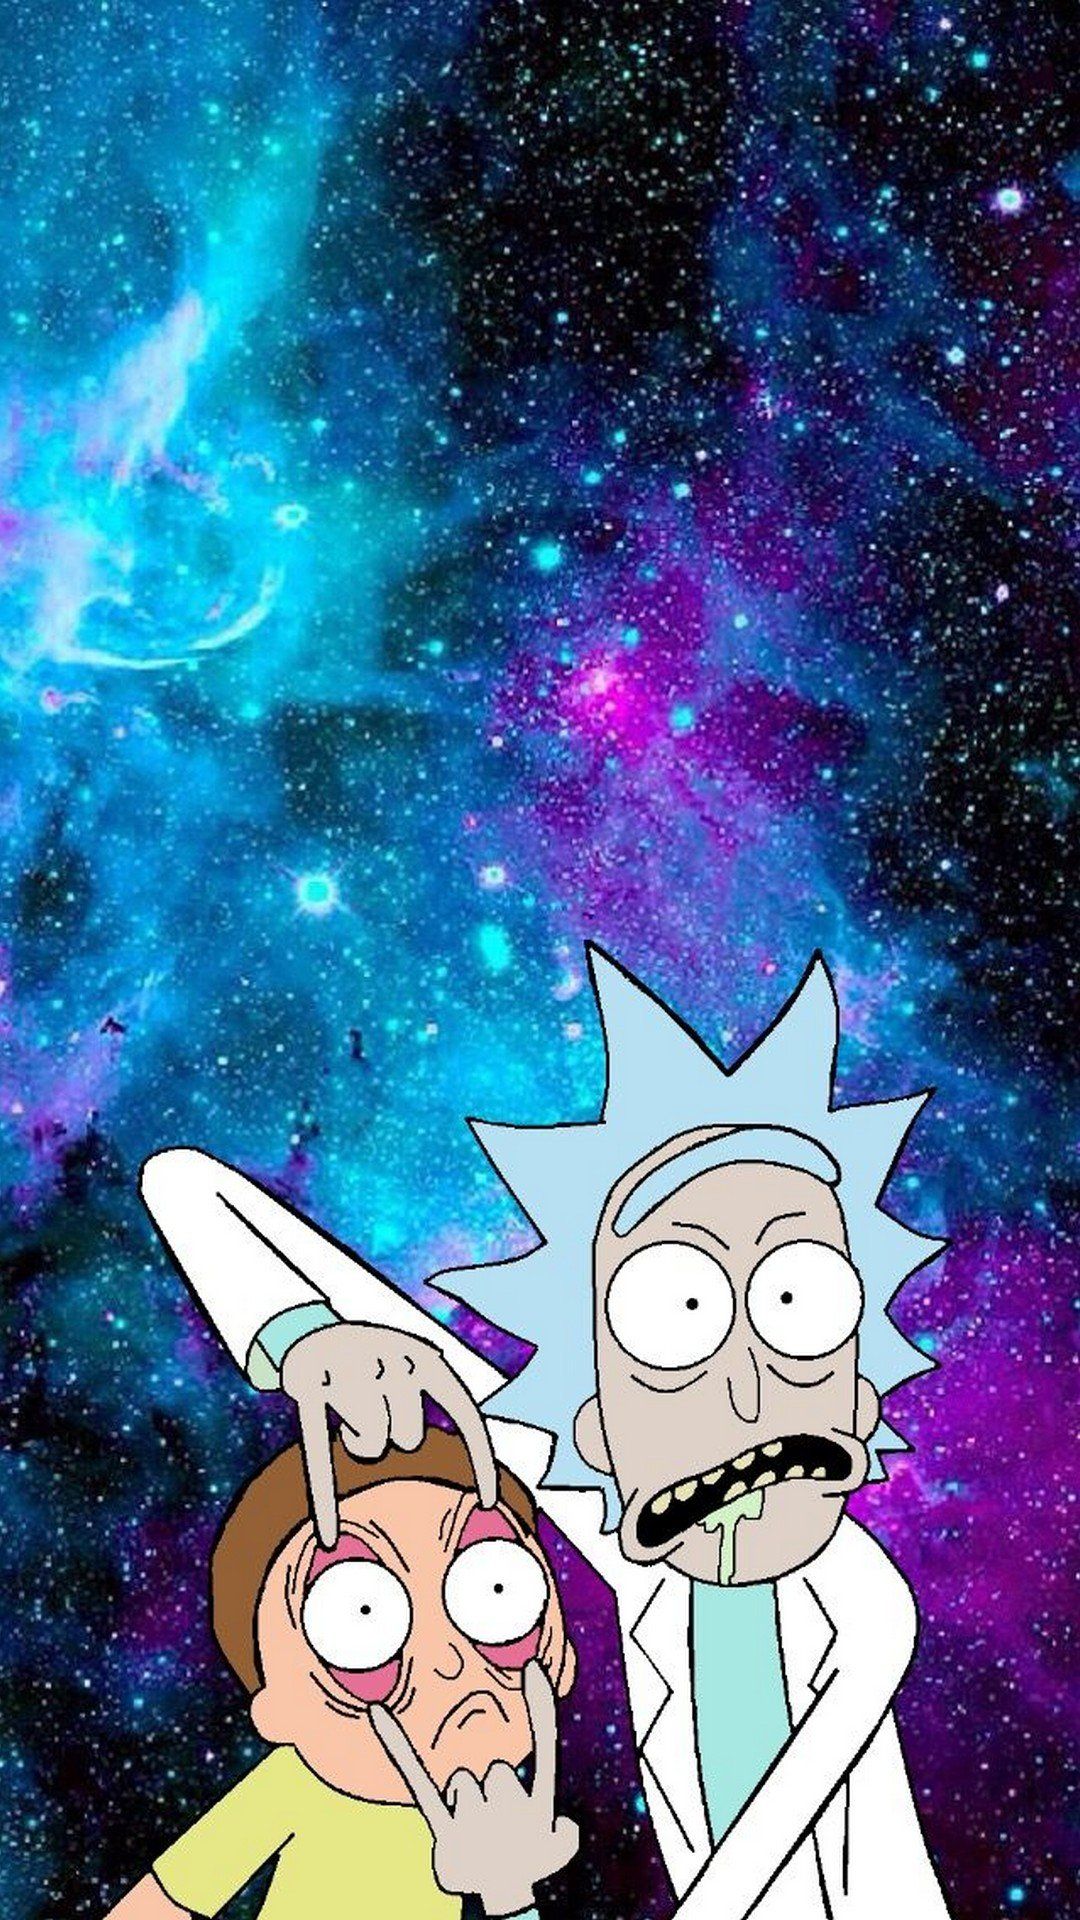 ricky and morty wallpapers hd 4k 5